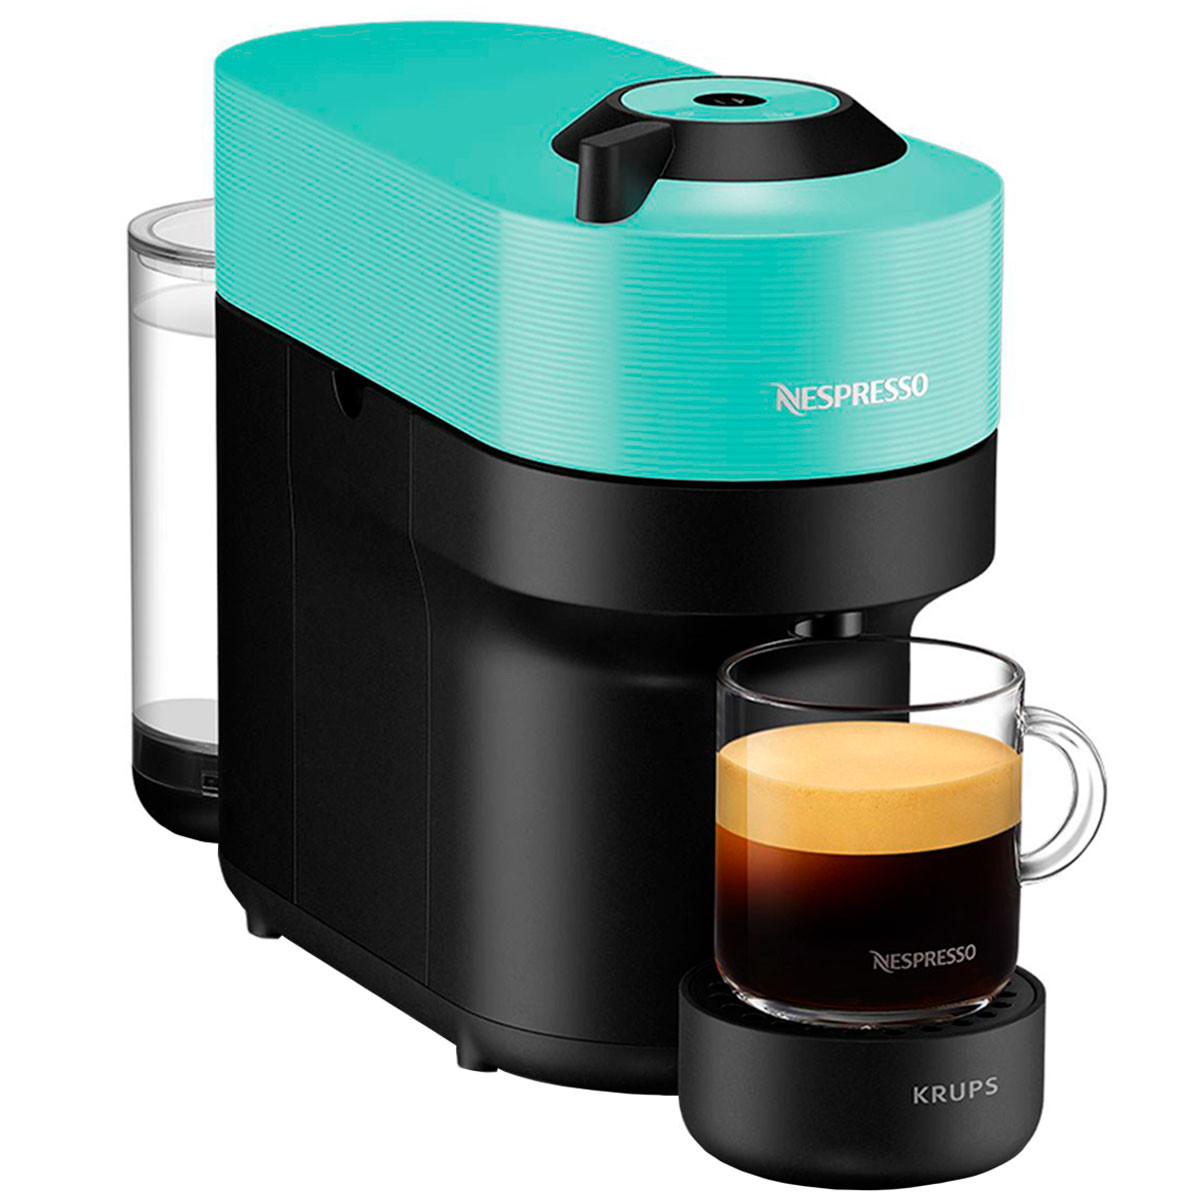 CAFETERA KRUPS GENIO S TOUCH KP440EHT